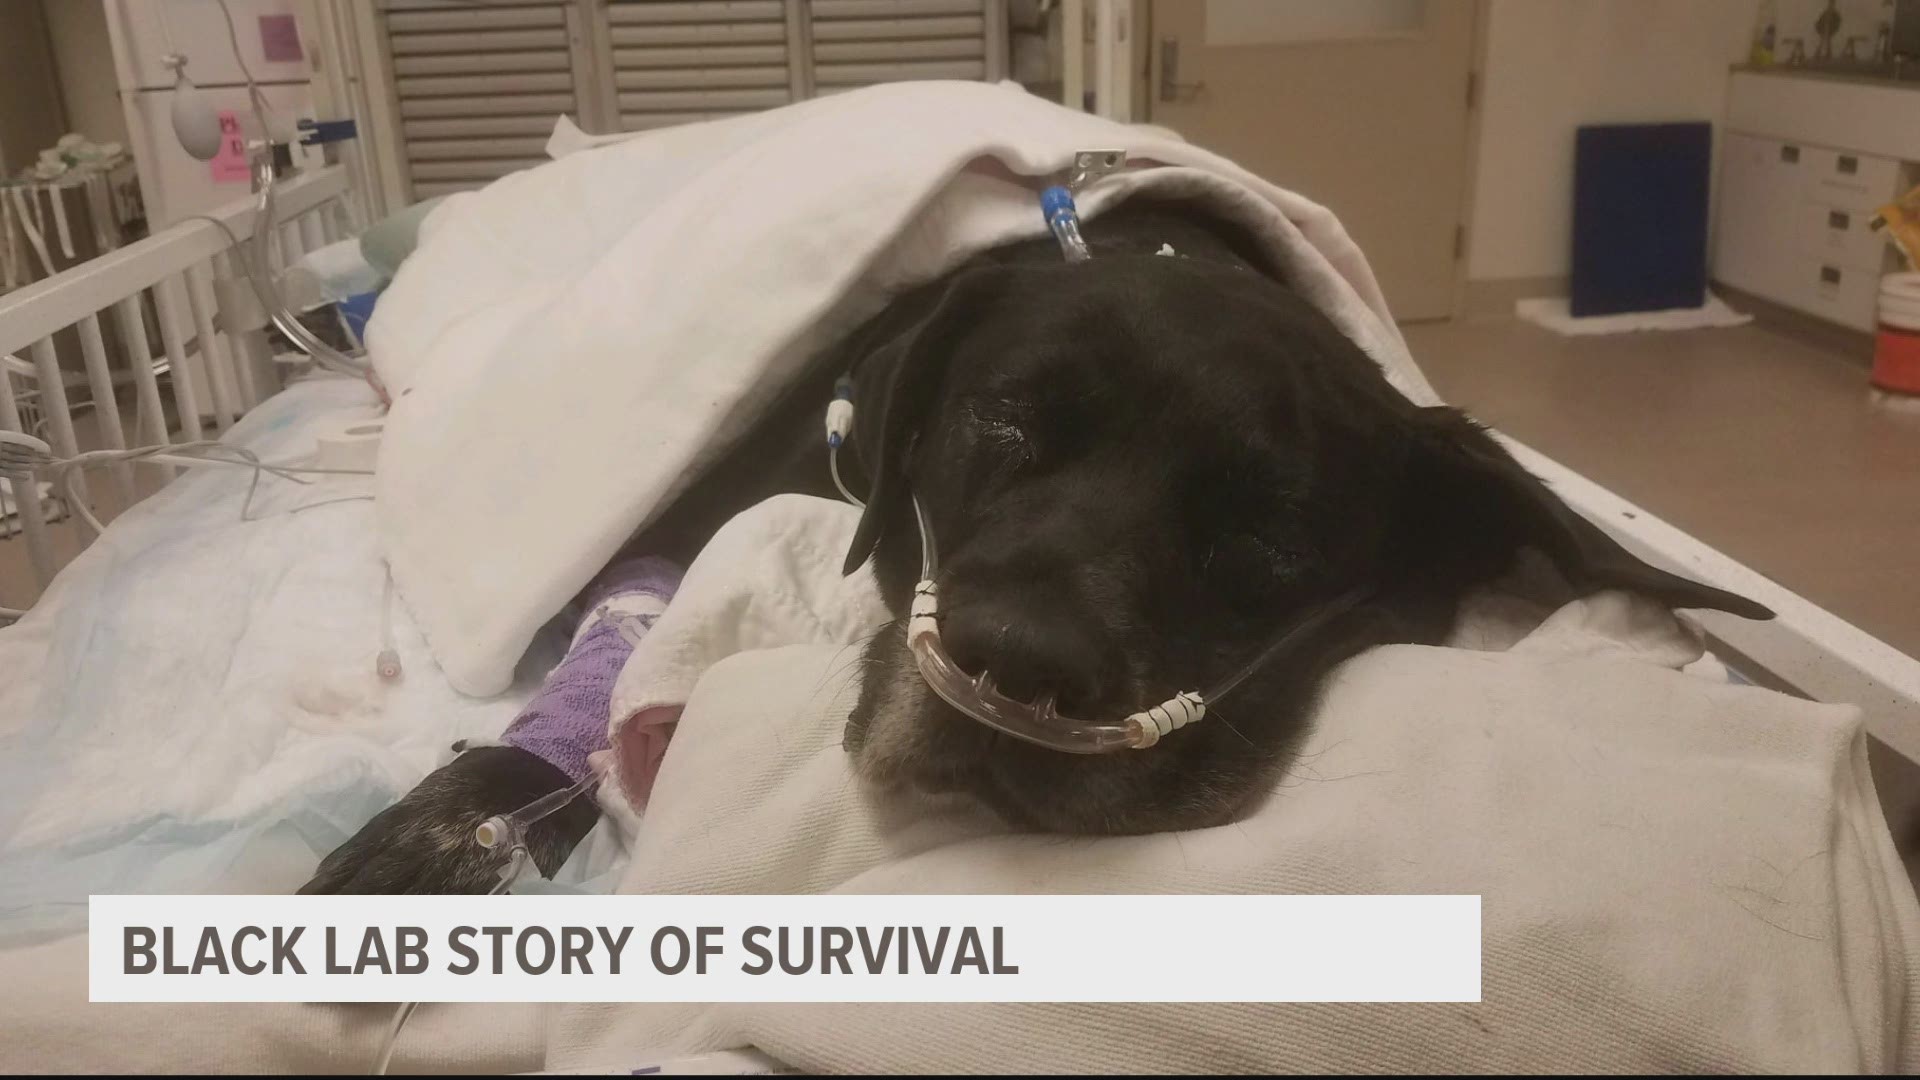 The Boone Humane Society first found the lab abandoned in a park in Boone, pregnant with 21 puppies. None of the puppies survived, but mama is recovering at the vet.